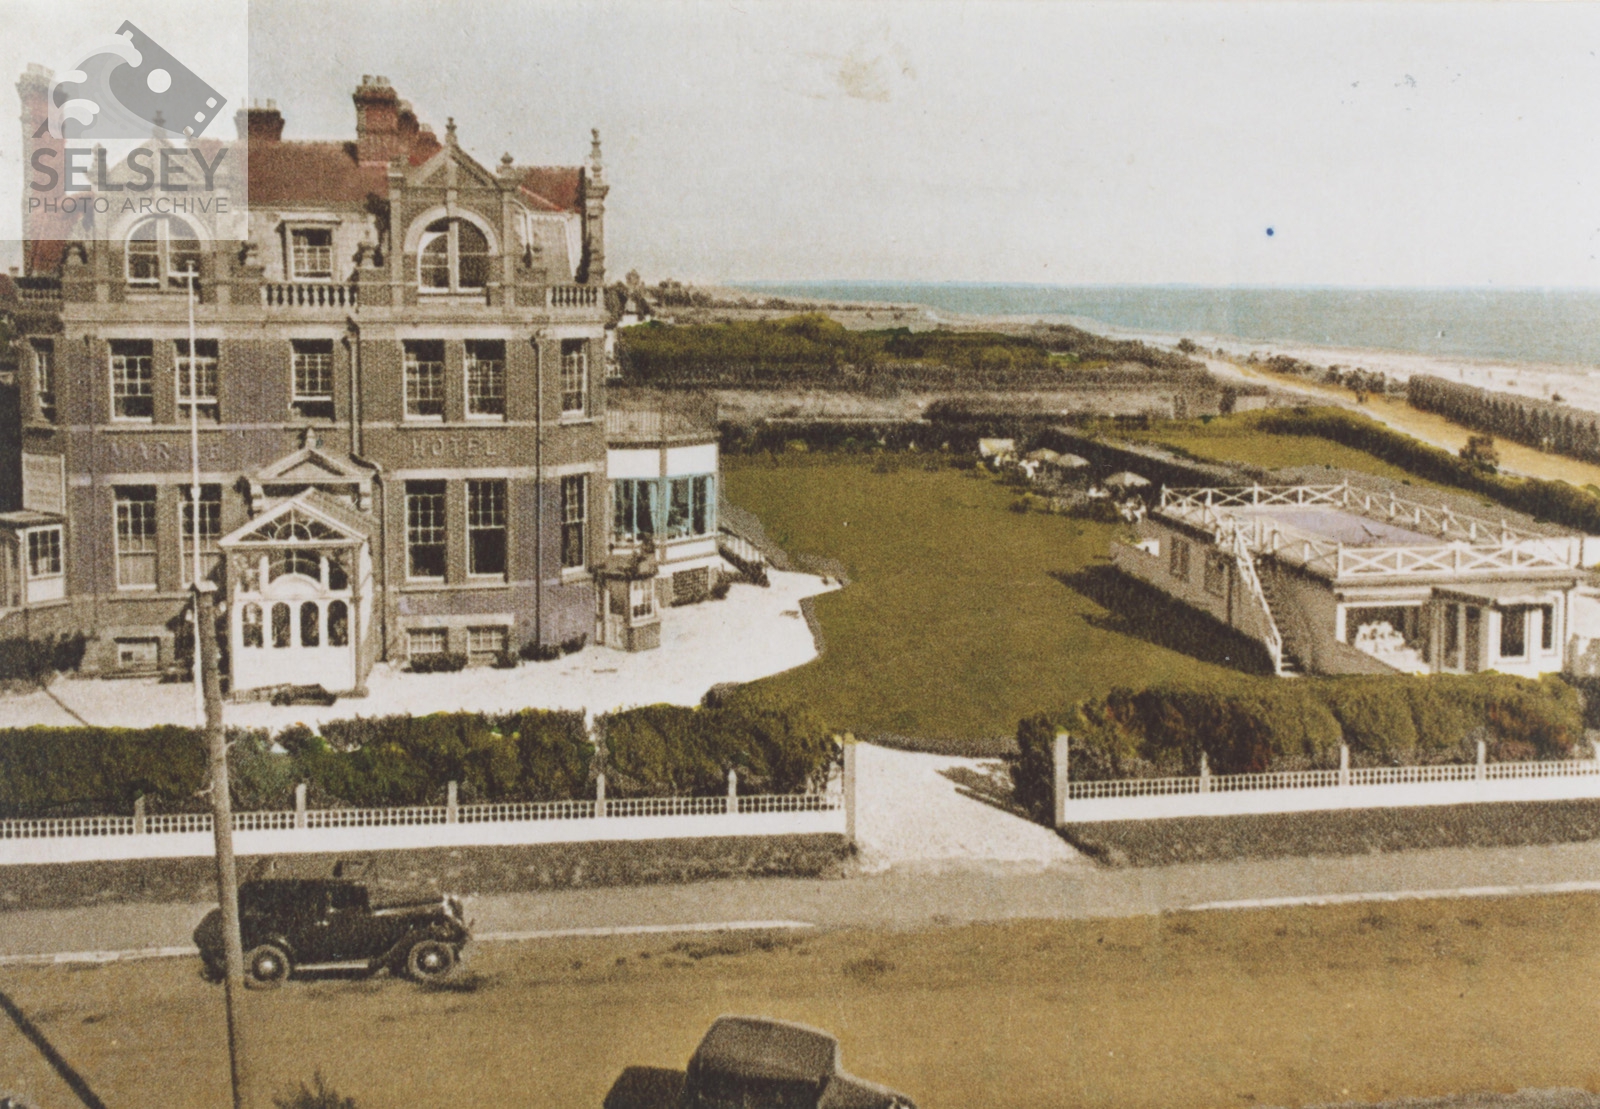 The Marine Hotel Selsey Selsey Photo Archive